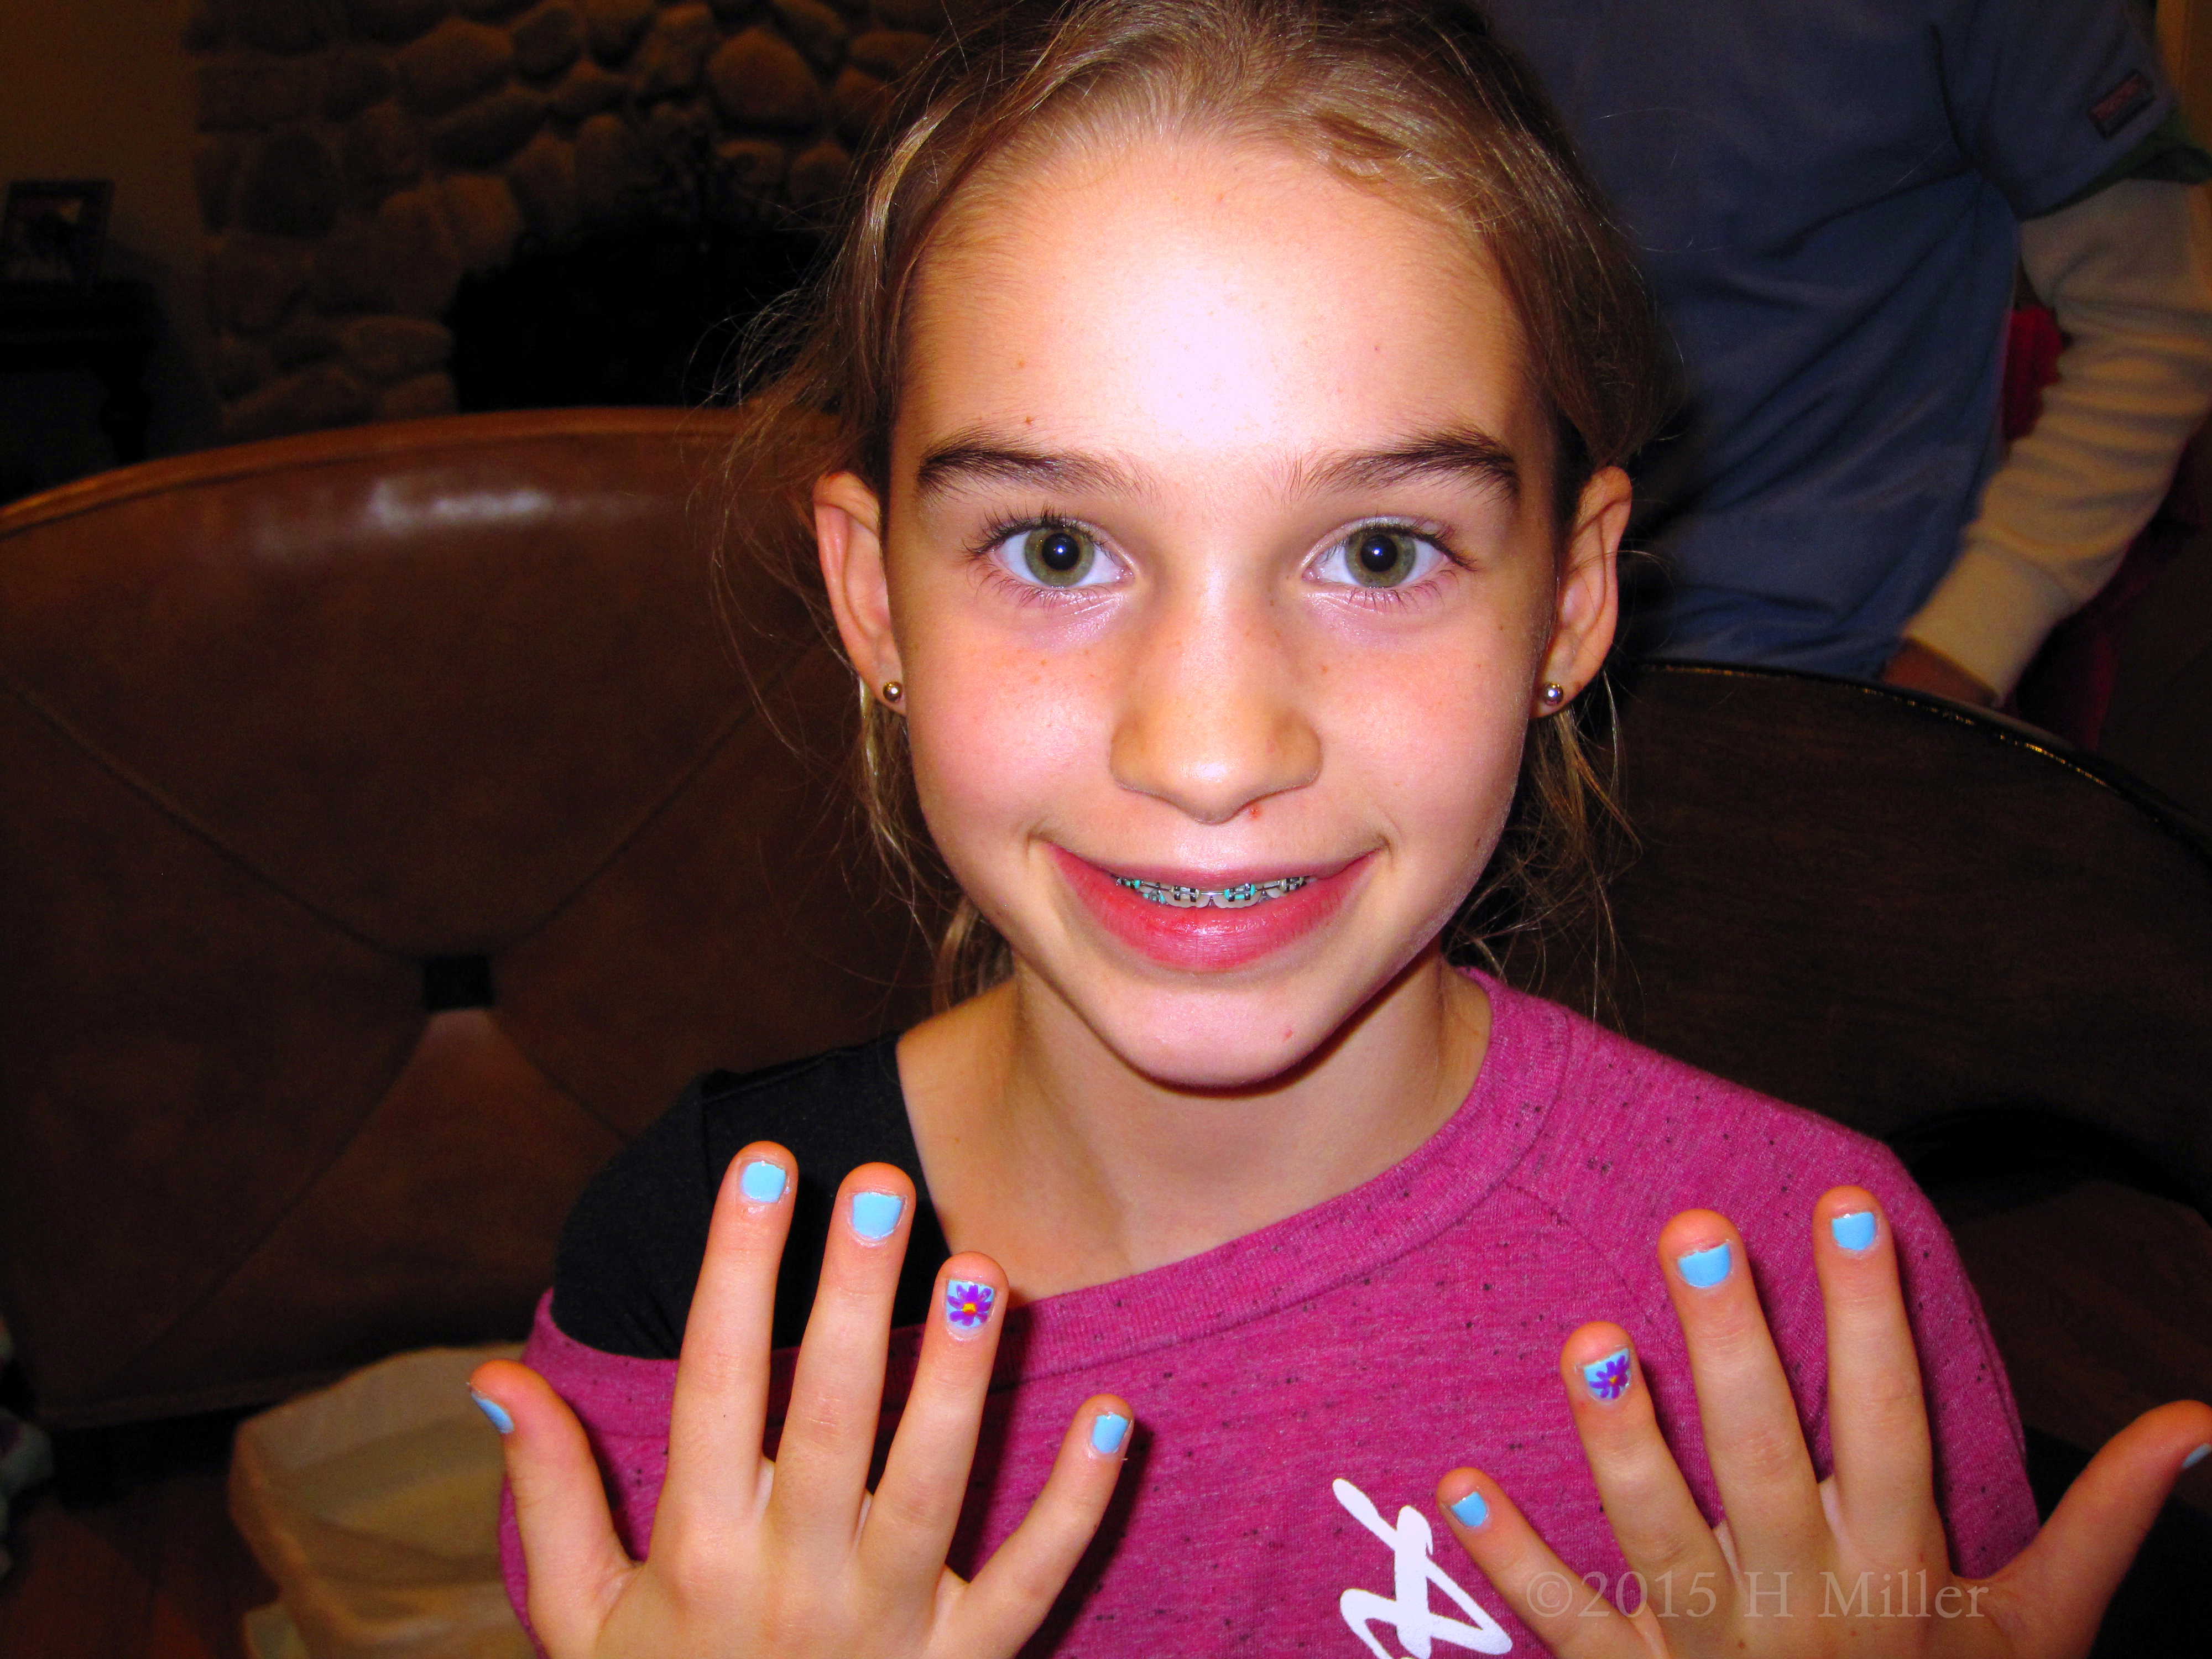 Showing Off Her Cupcake Nail Art Designs 